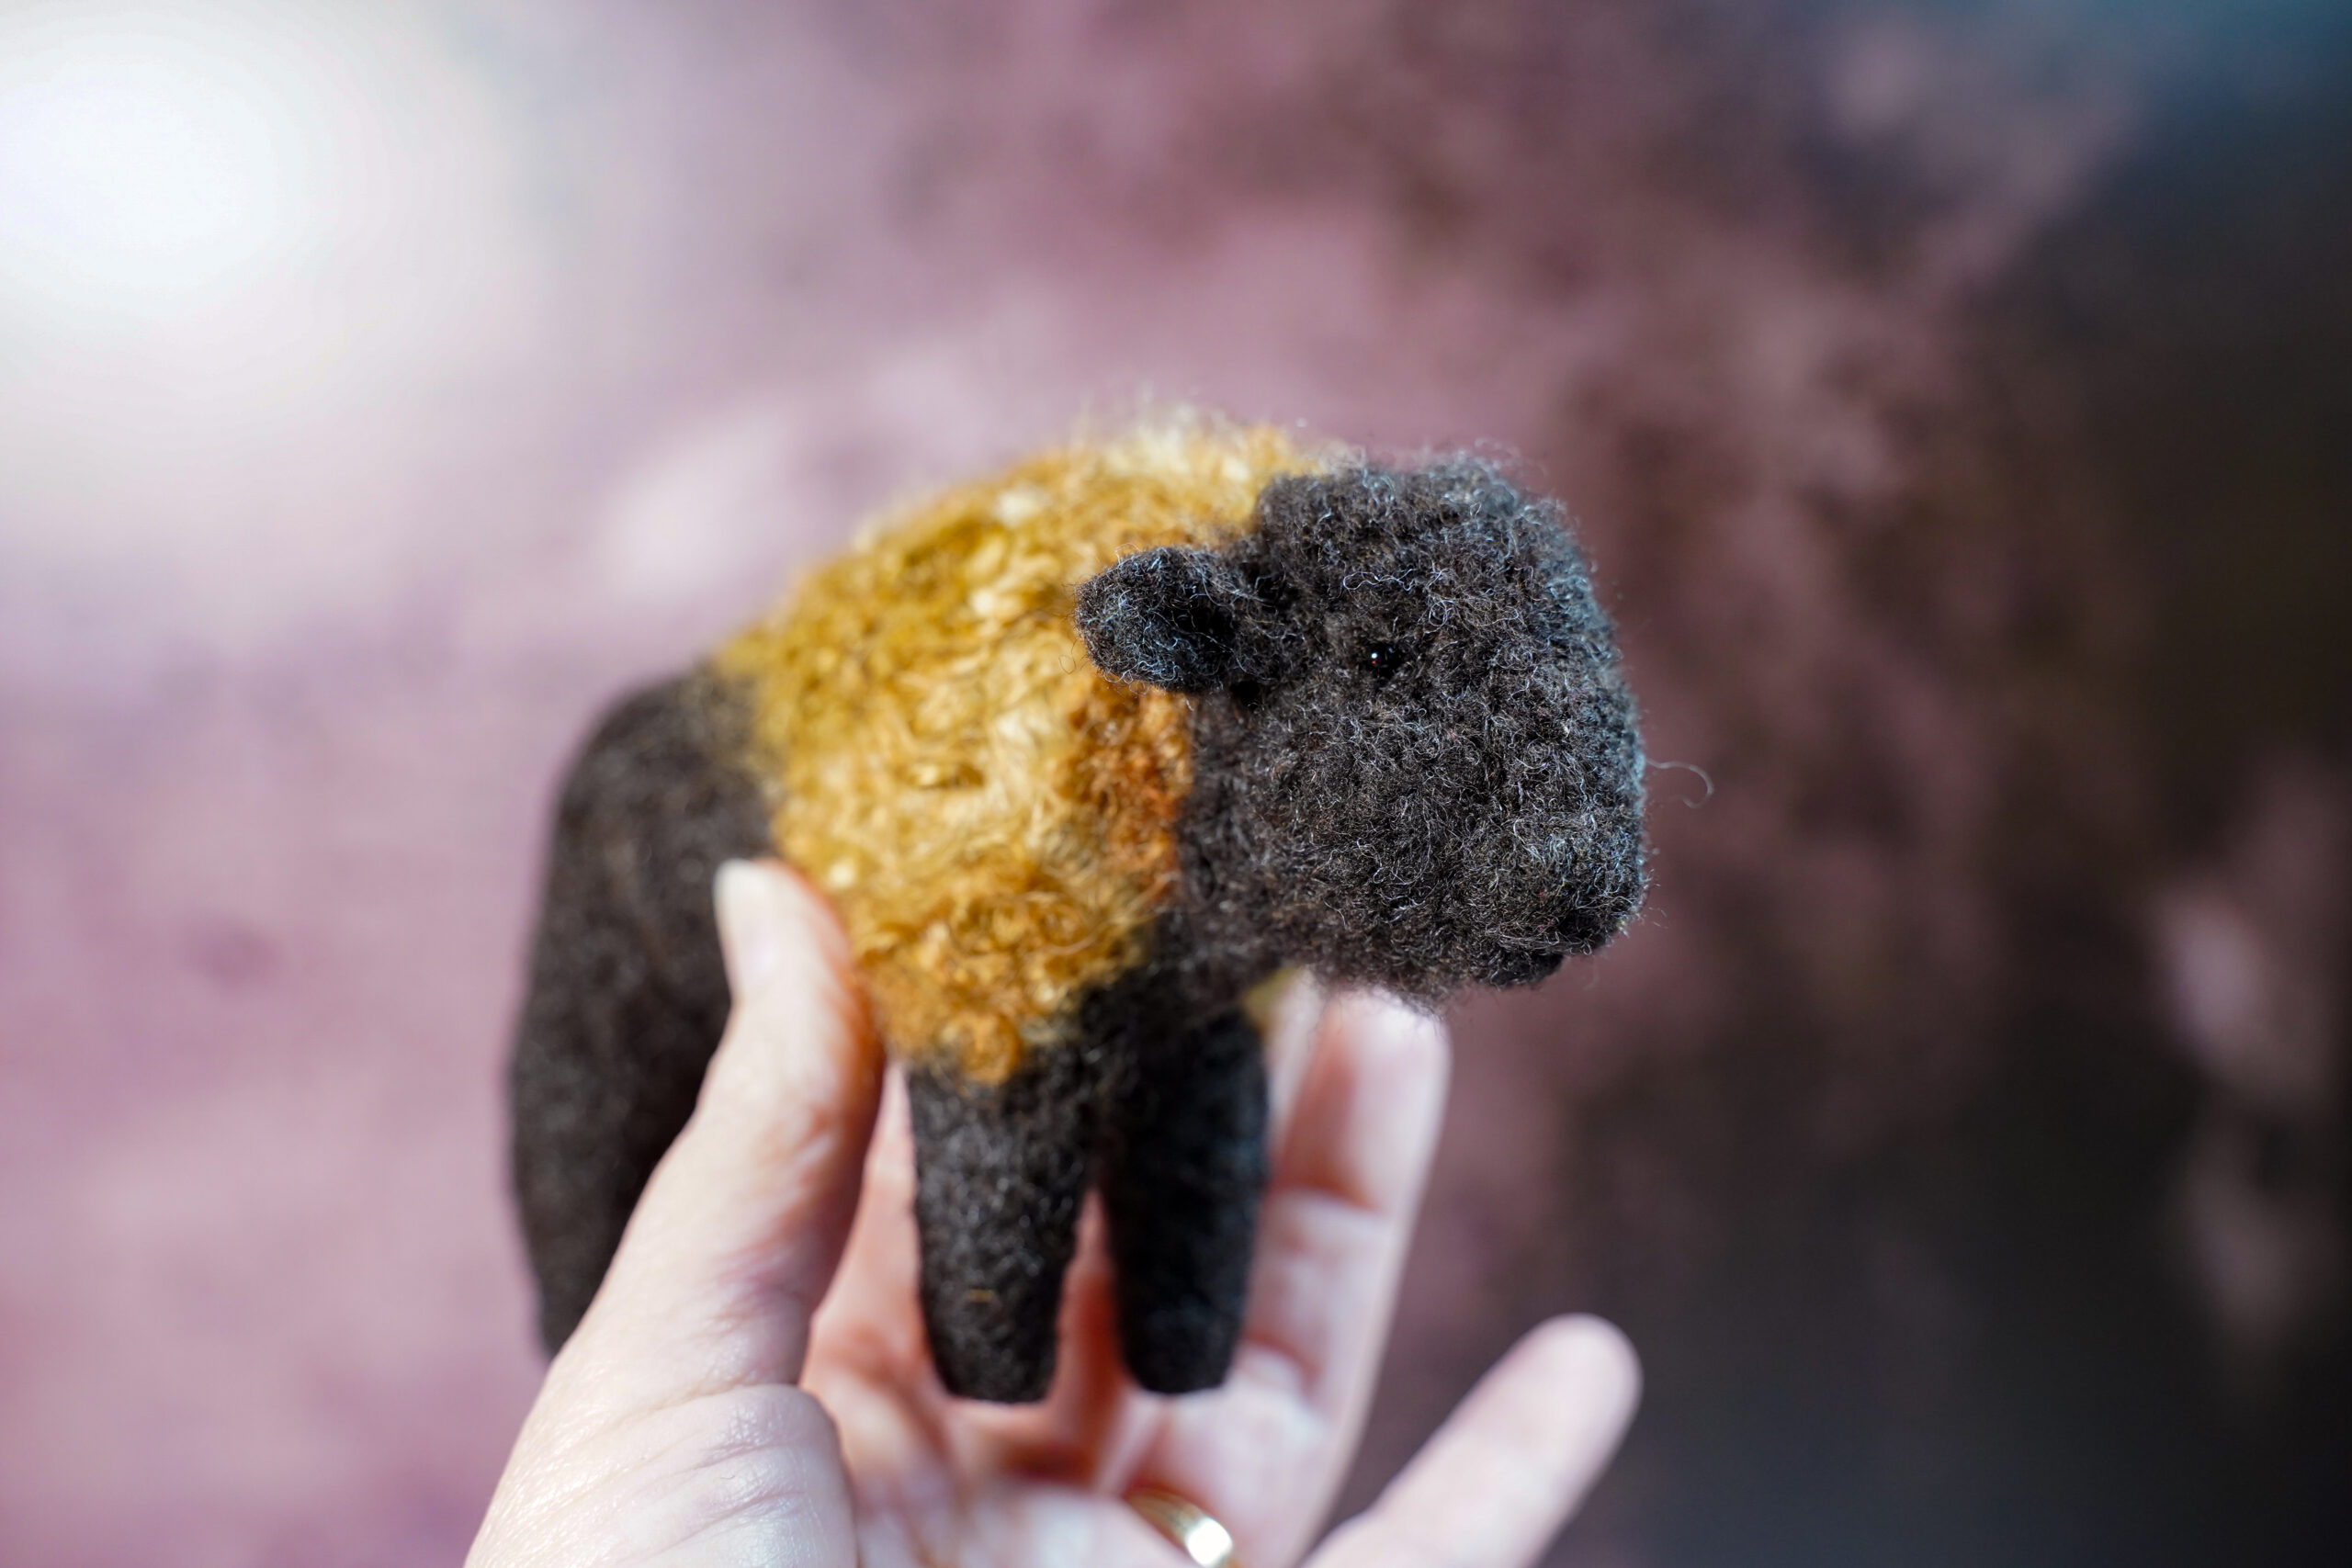 Bison Needle Felting Kit a DIY craft for beginners in Needle Felting